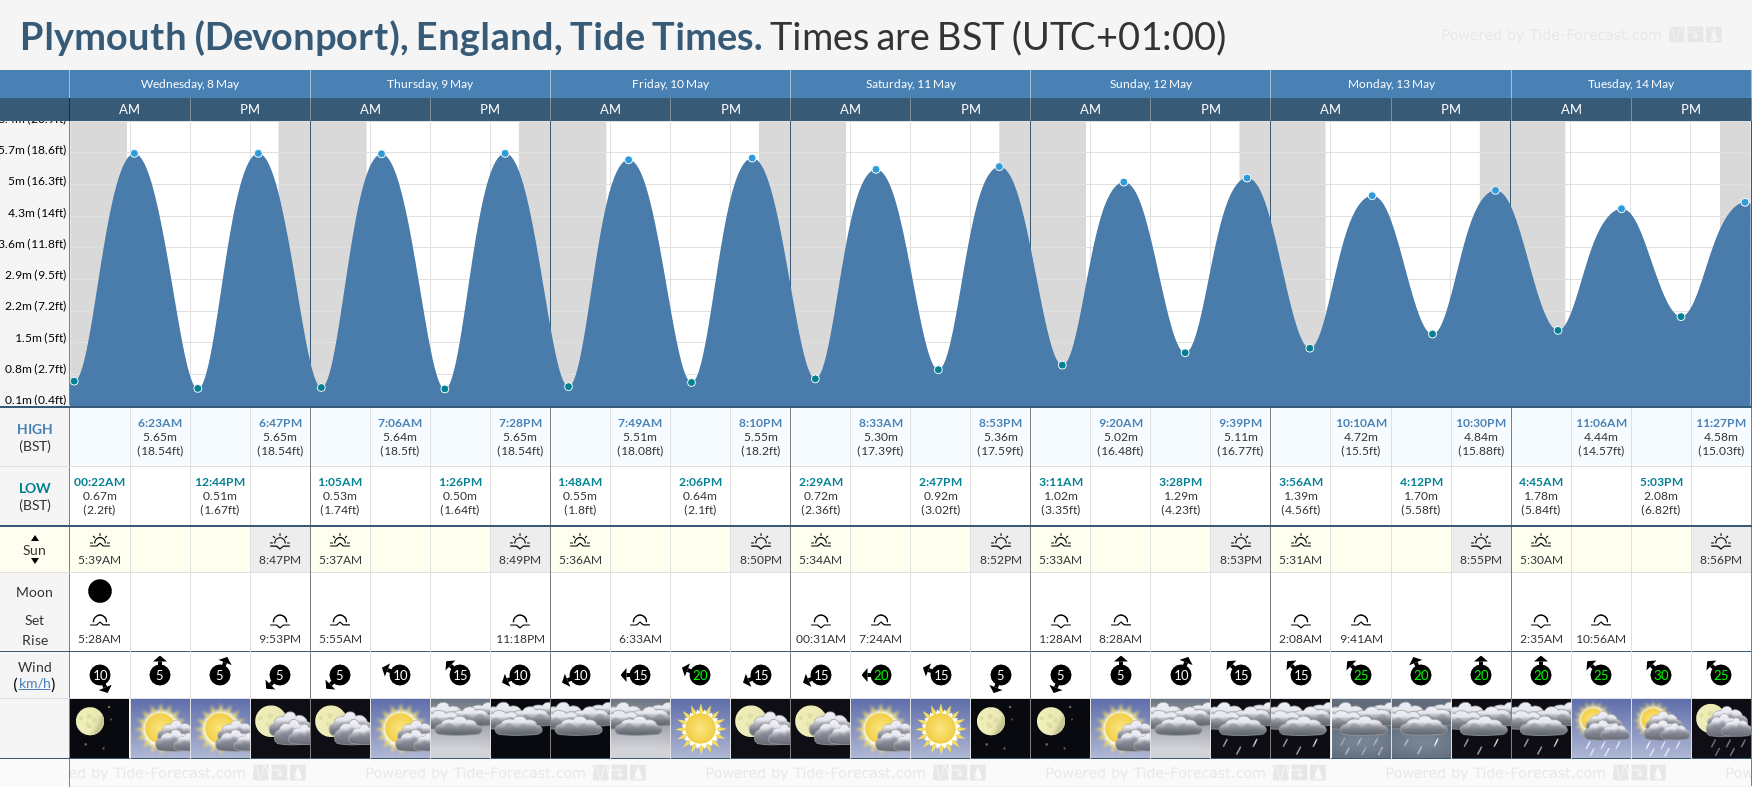 Plymouth (Devonport), England Tide Chart including high and low tide tide times for the next 7 days